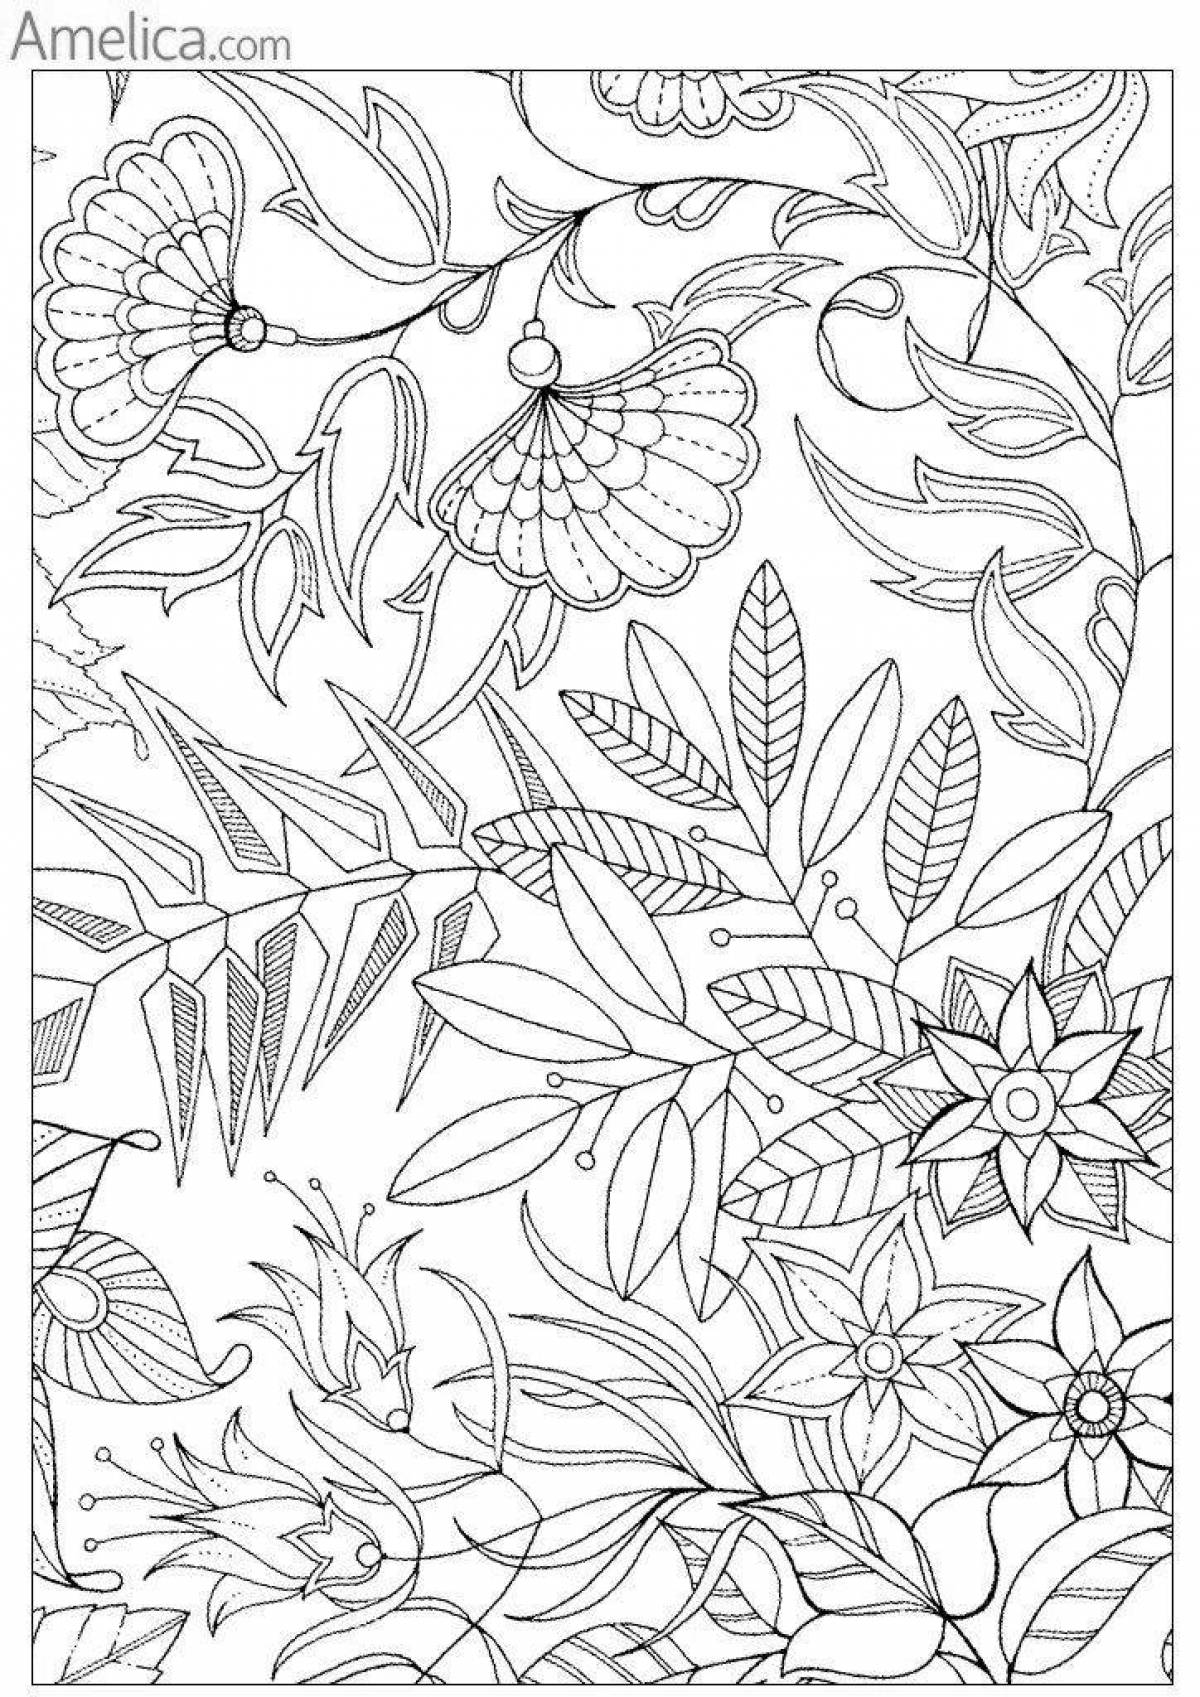 Whimsical forest coloring book